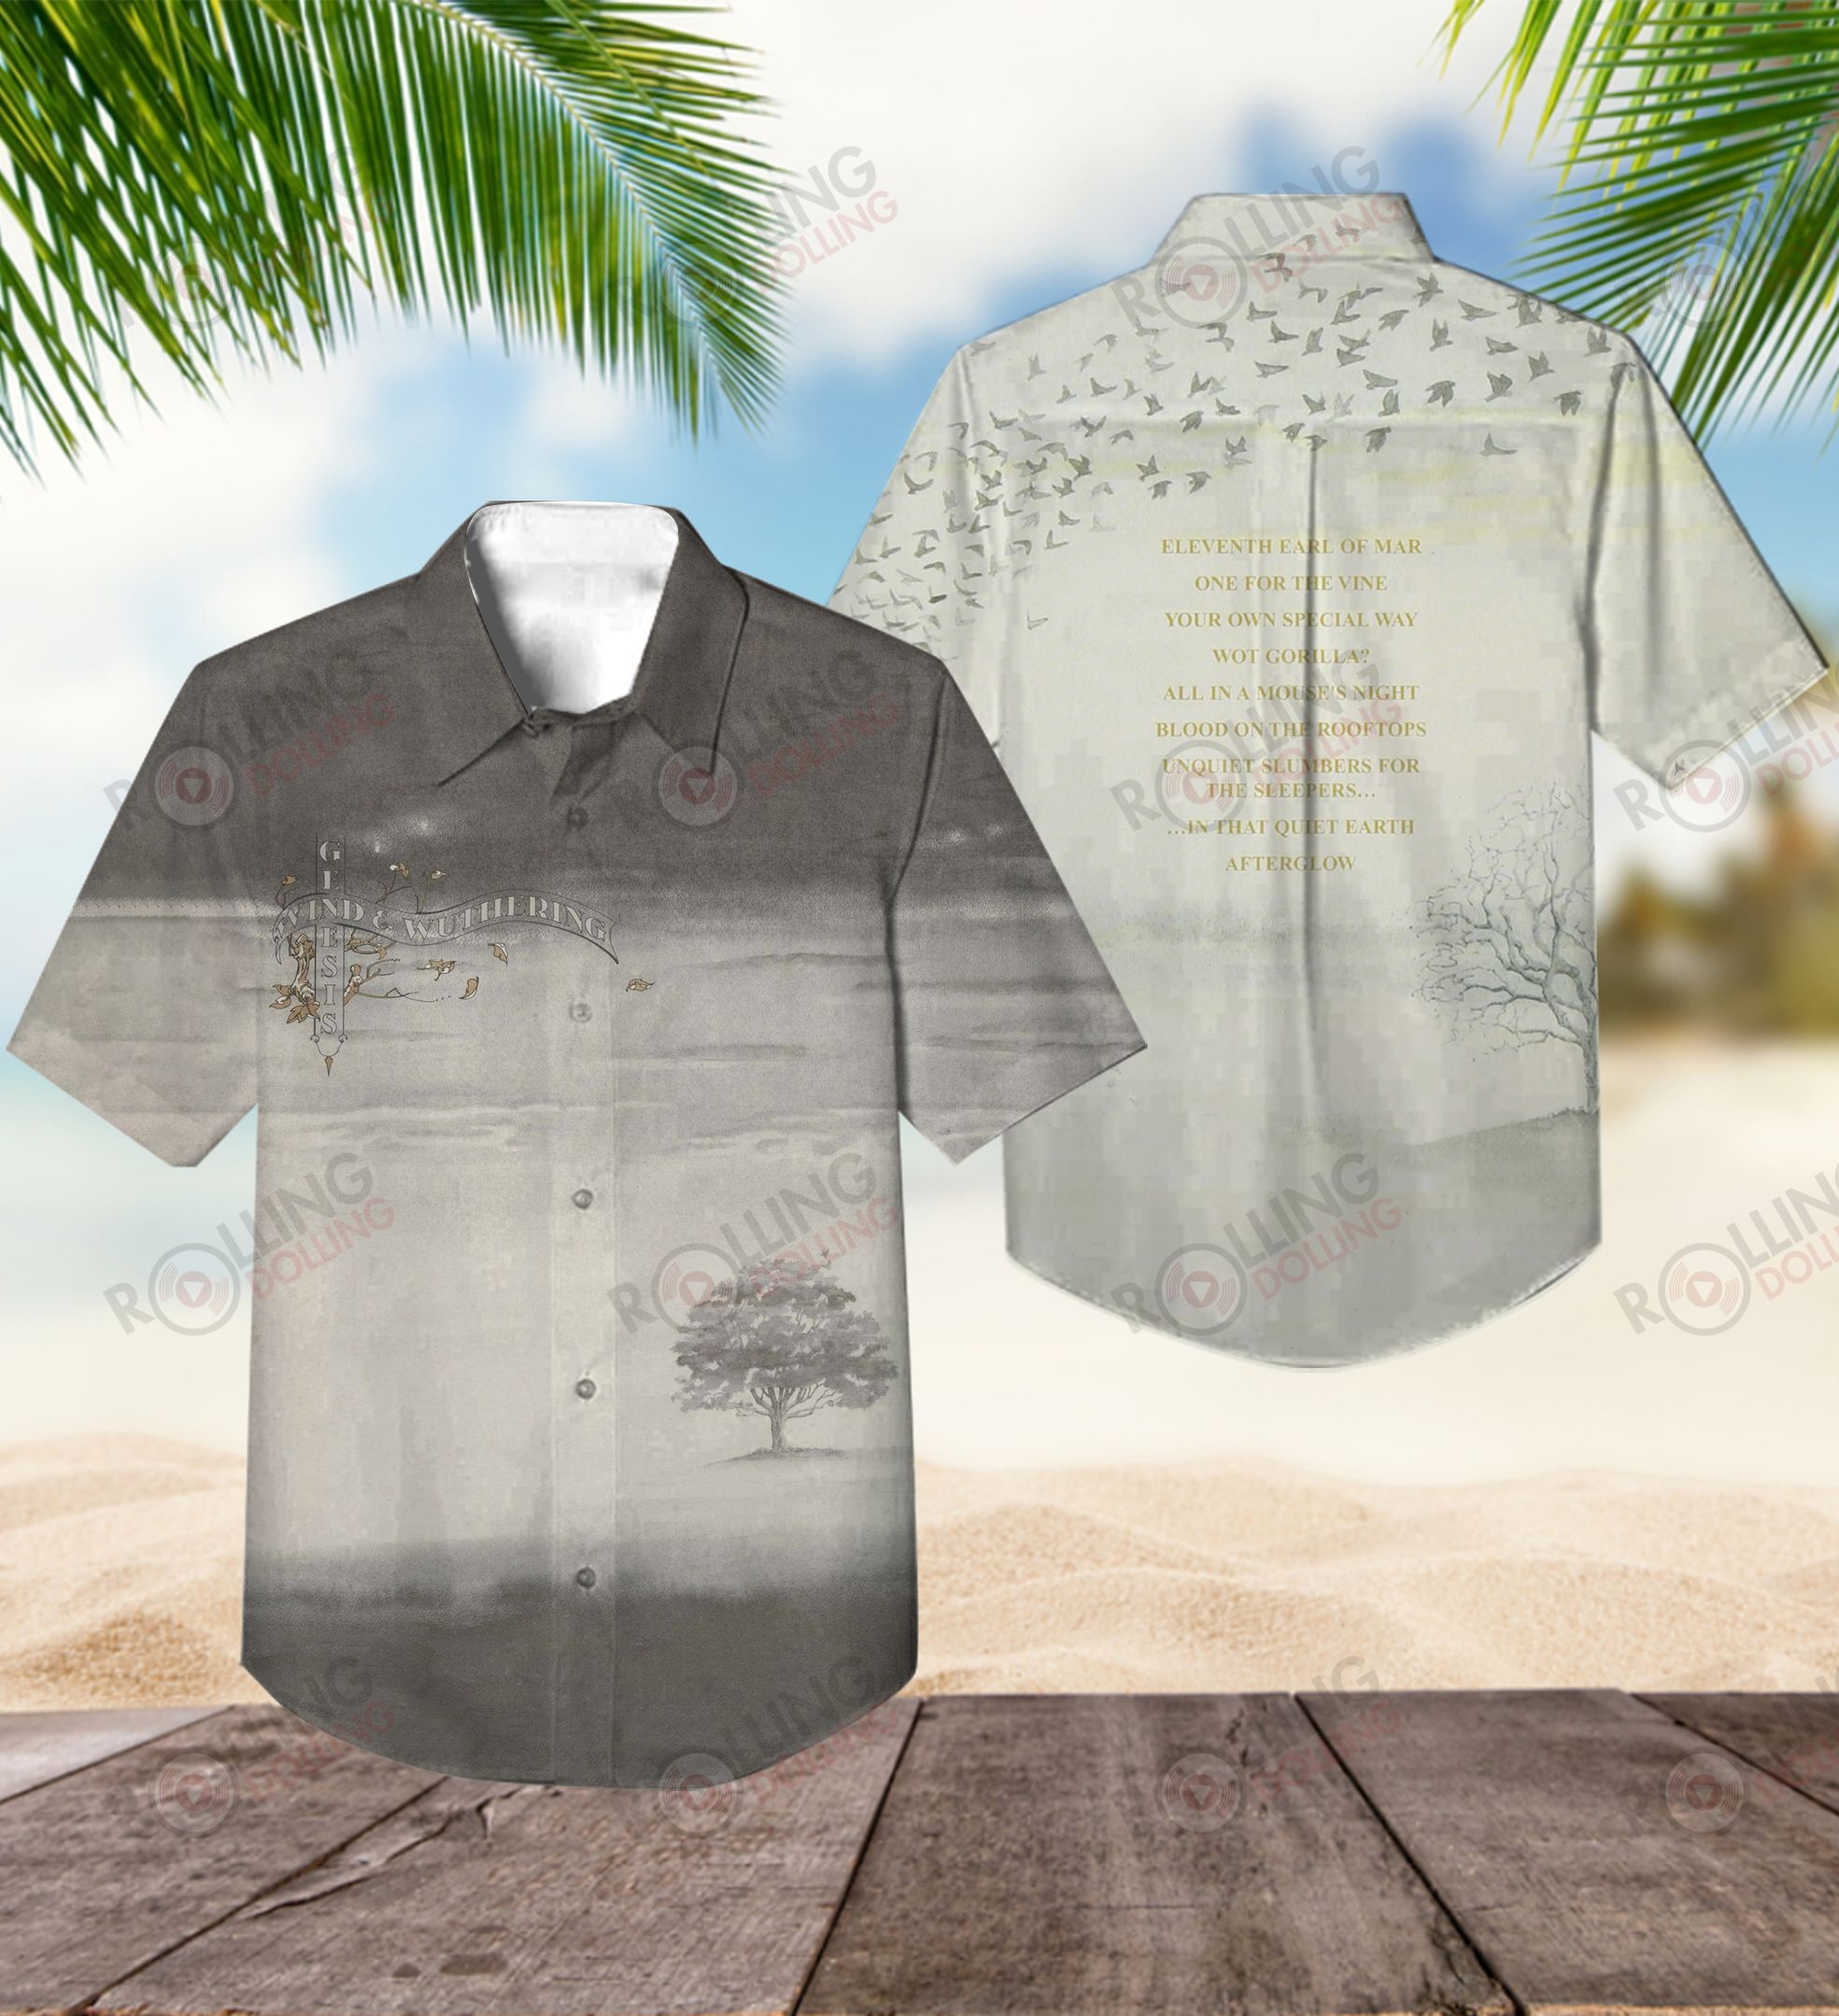 Check out these top 100+ Hawaiian shirt so cool for rock fans 327